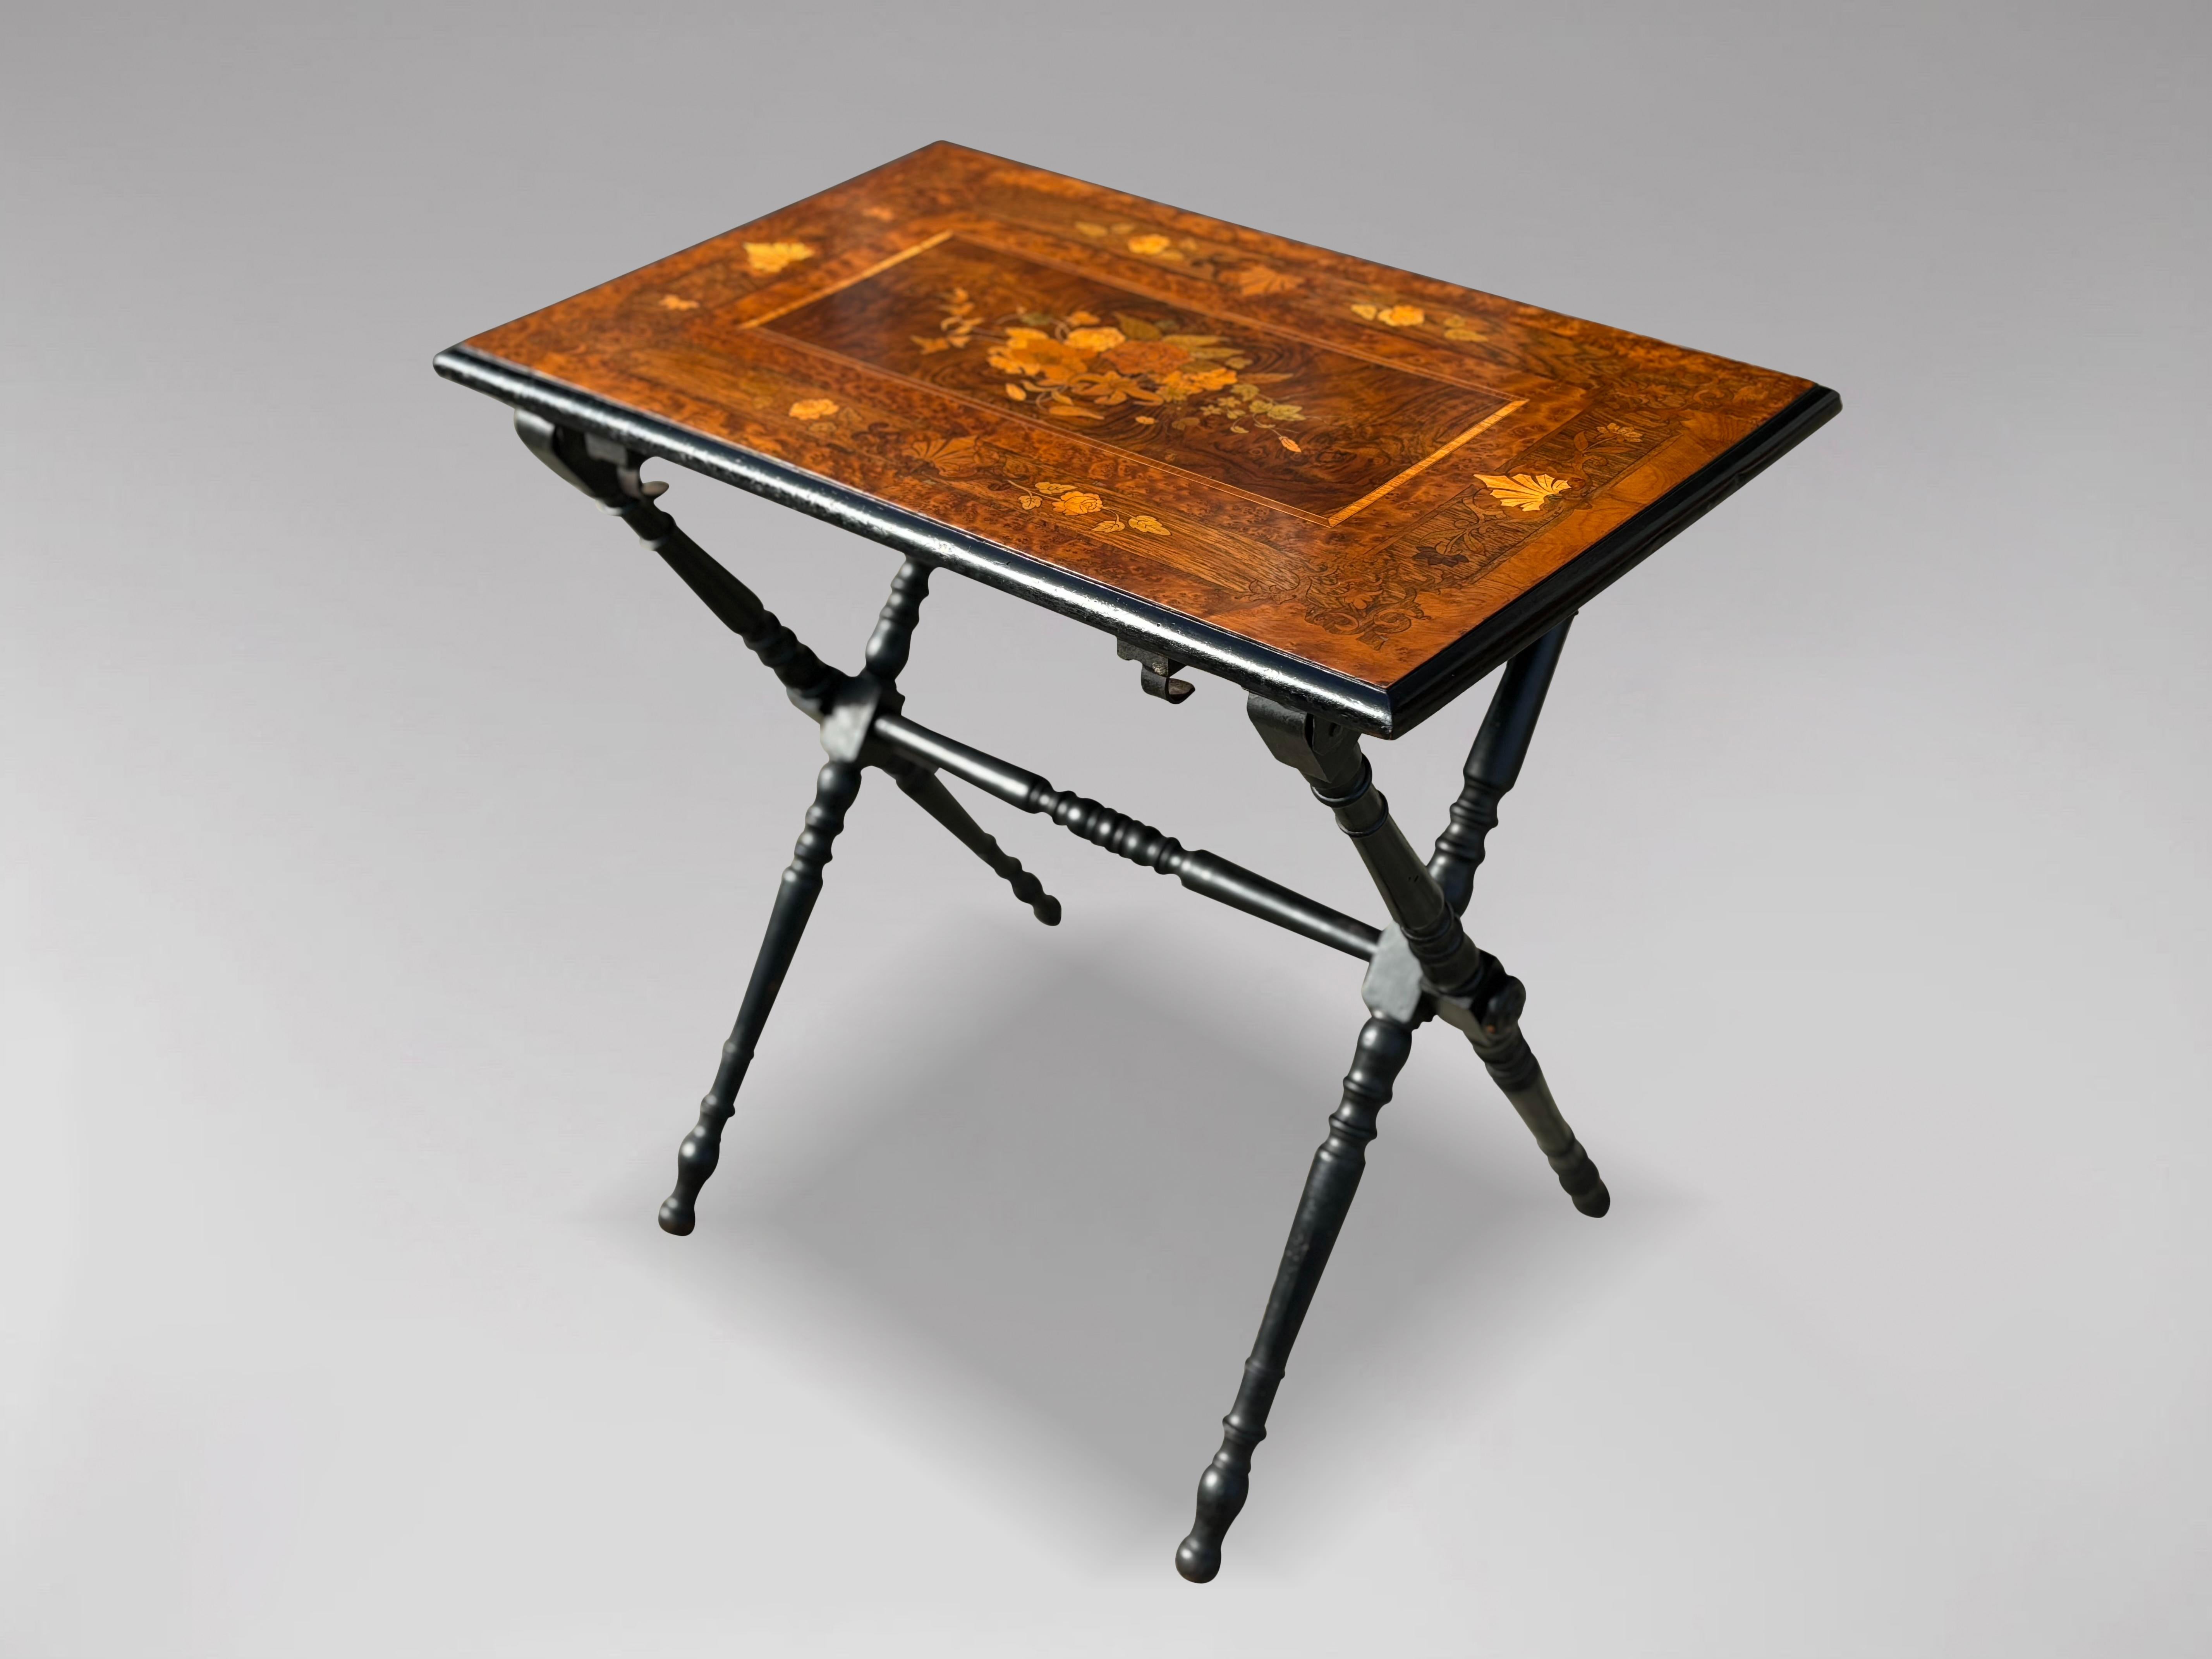 A fine late 19th century French Napoleon III folding table. A rectangular marquetry top made up of several light woods and mahogany inlays, surrounded by a moulded blackened wooden edge. This folding table rests on two pairs of ebonised turned and